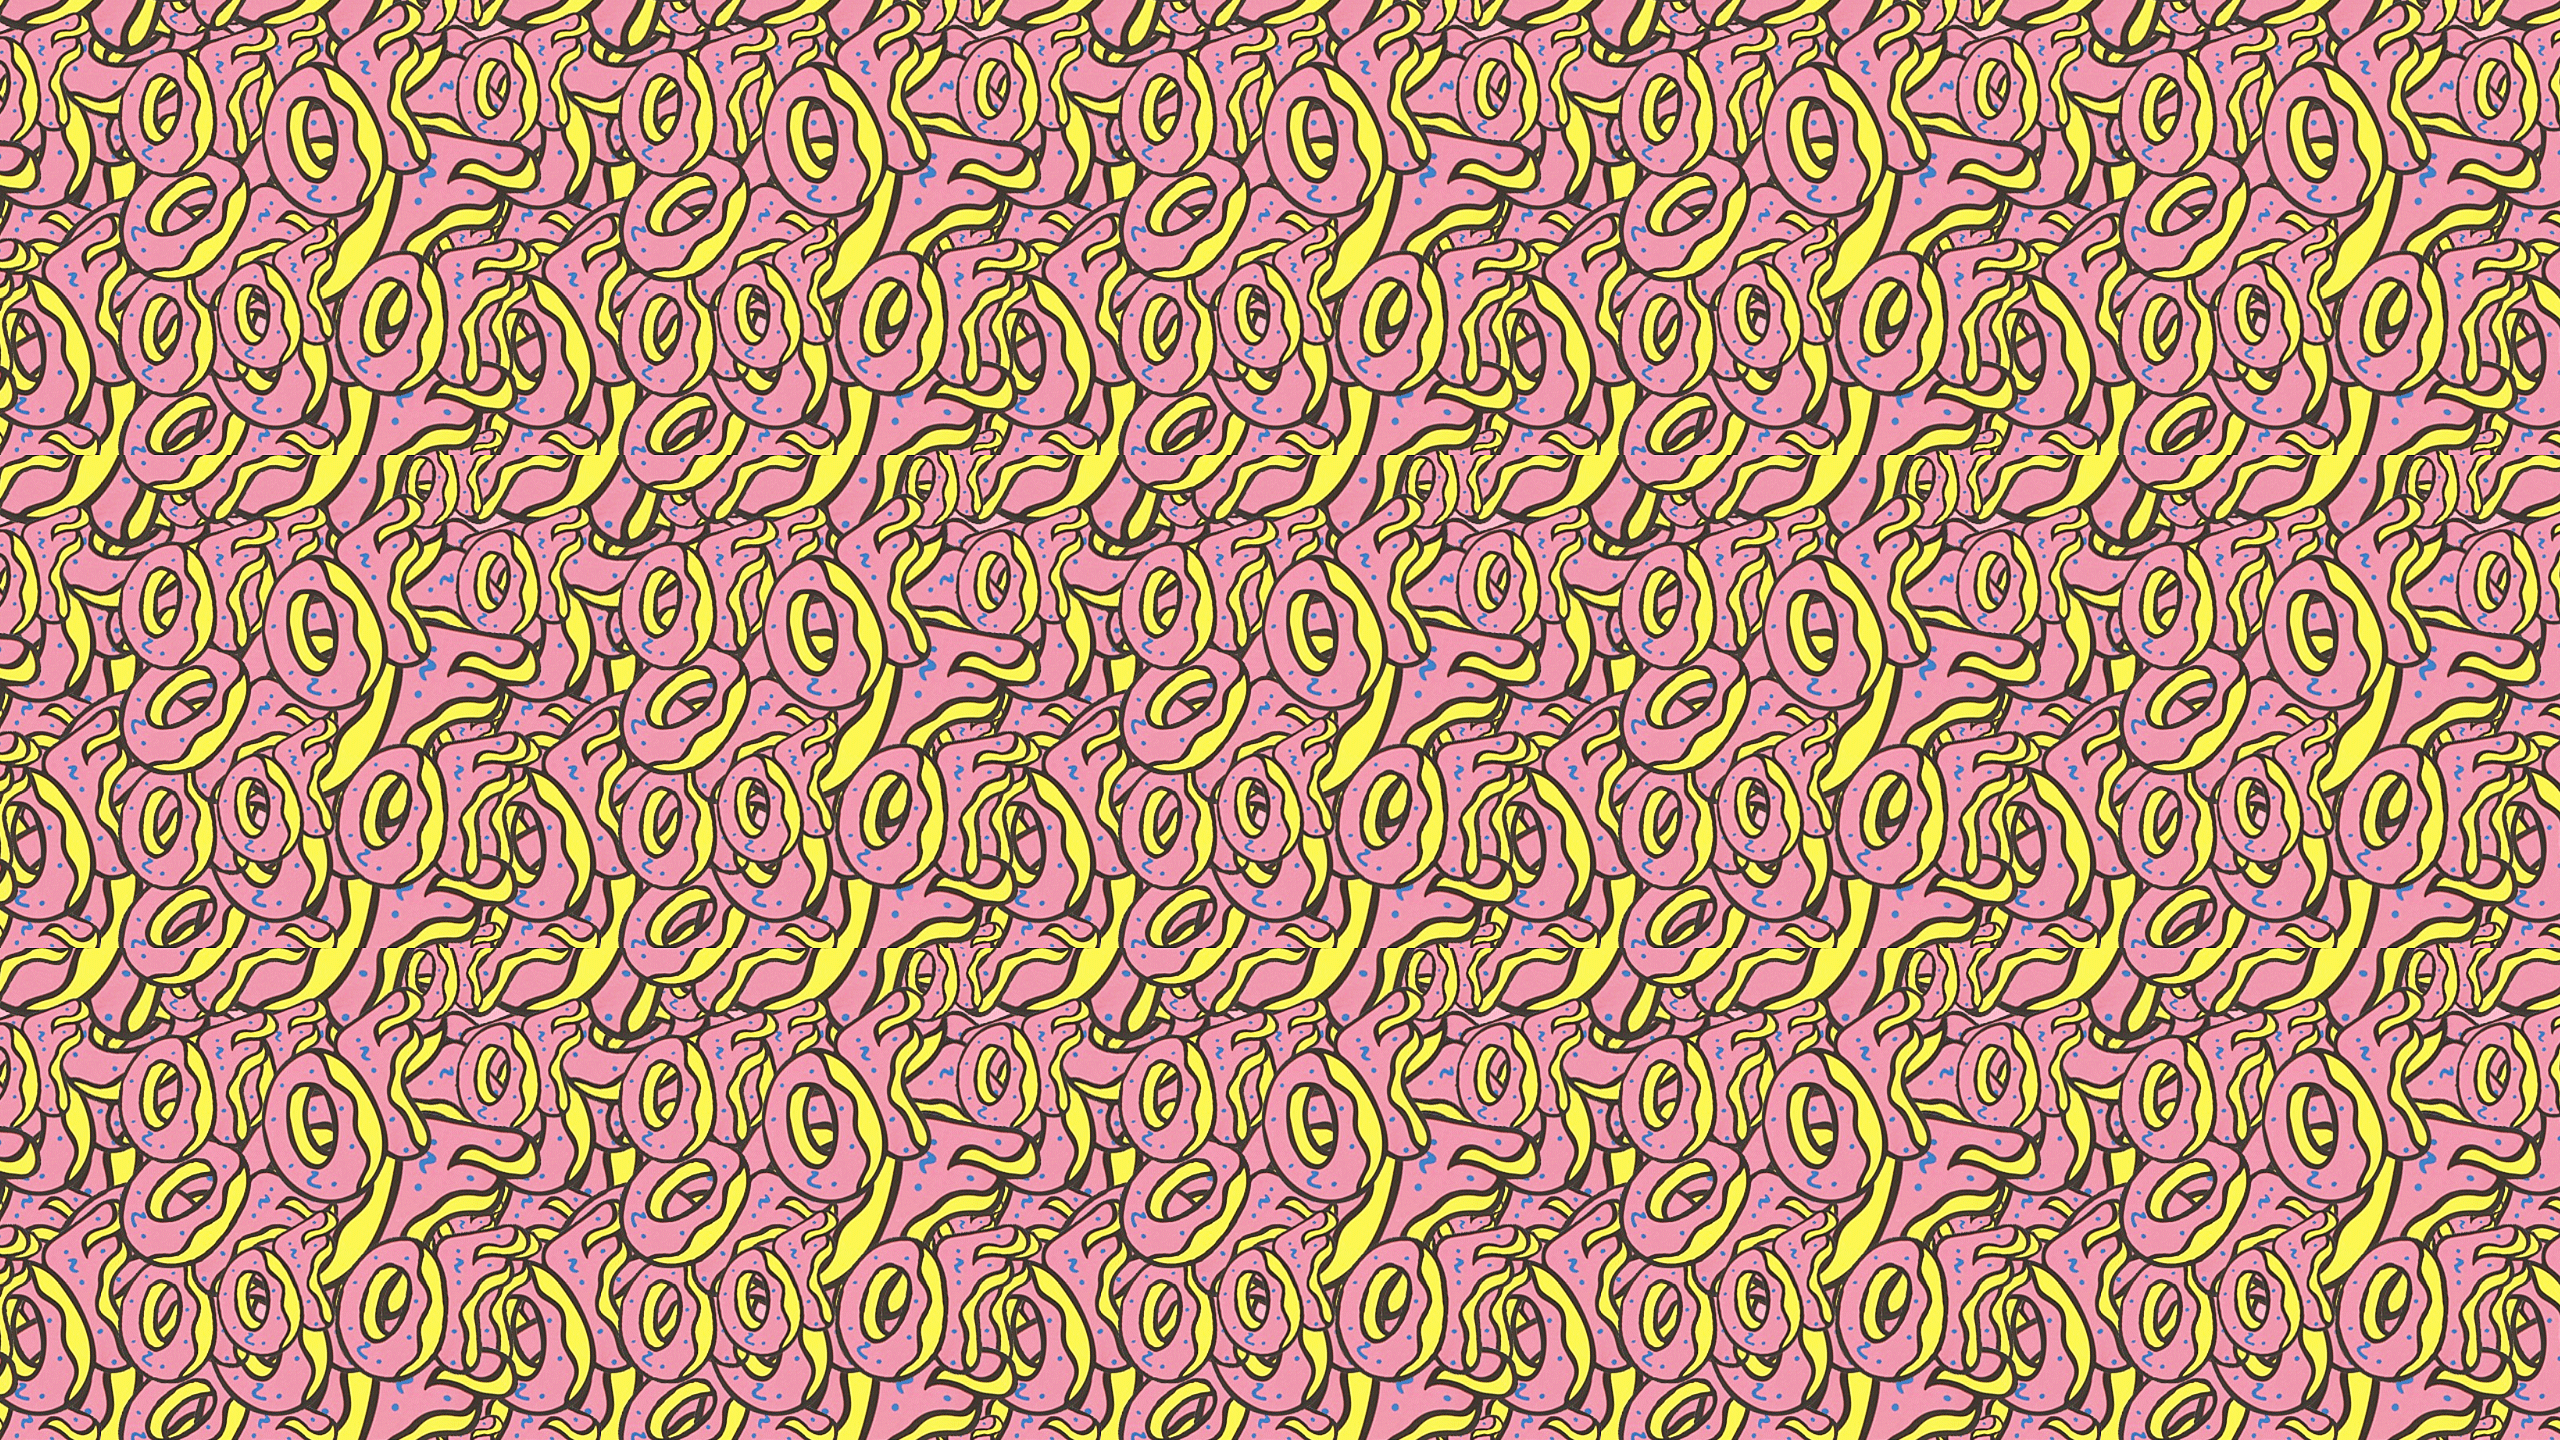 This Odd Future Desktop Wallpaper Is Easy Just Save The